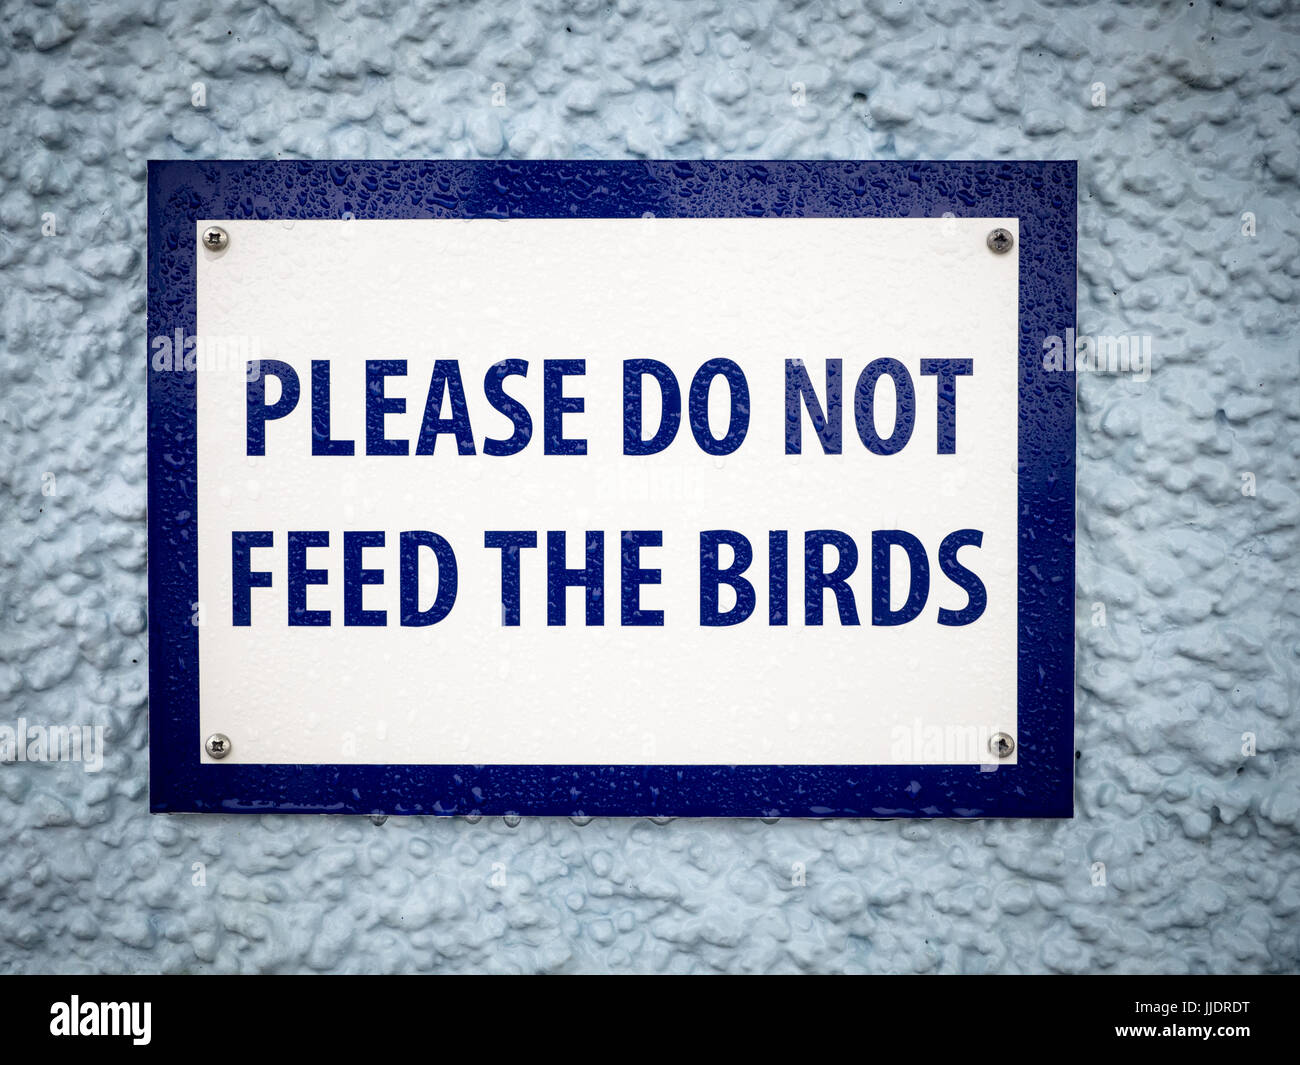 Please do not feed the birds sign Stock Photo